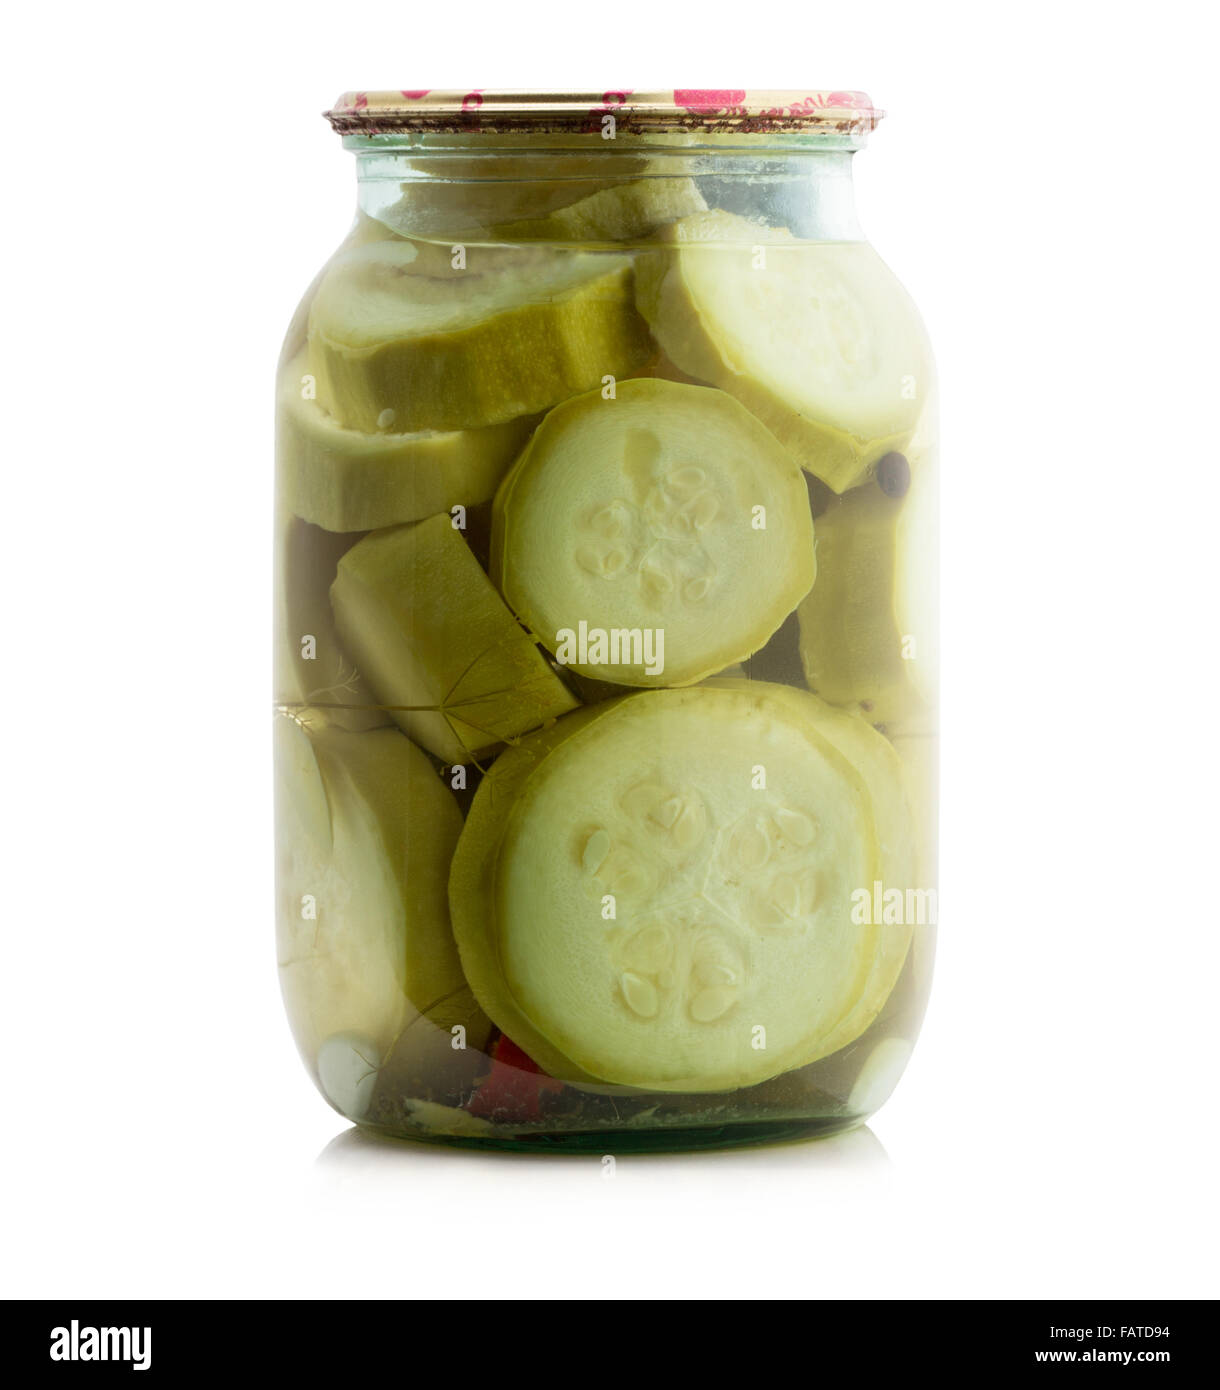 Marinated squash canned in glass jar isolated on the white background. Stock Photo